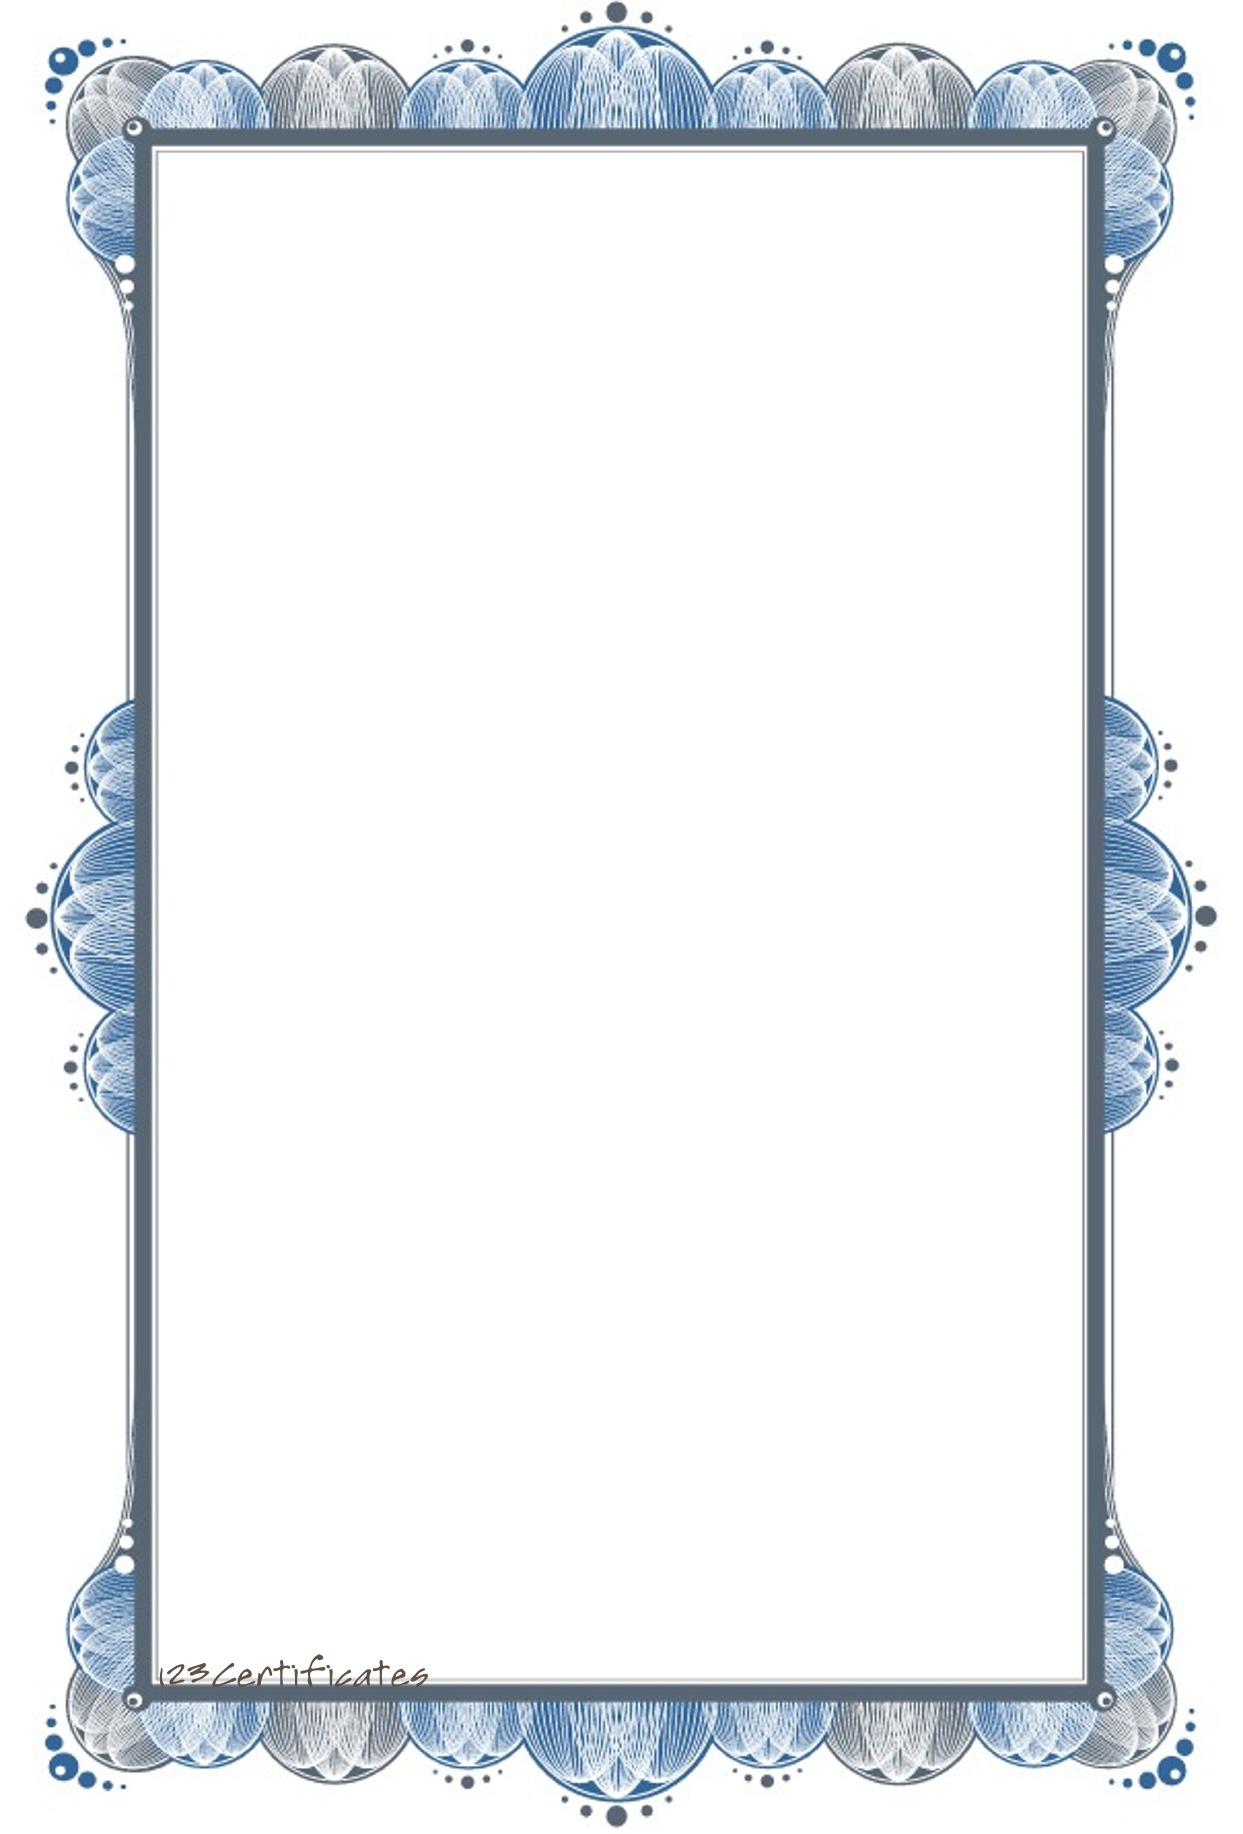 15 Free Border Templates Images Certificates Borders Templates Free Download Blue Certificate 